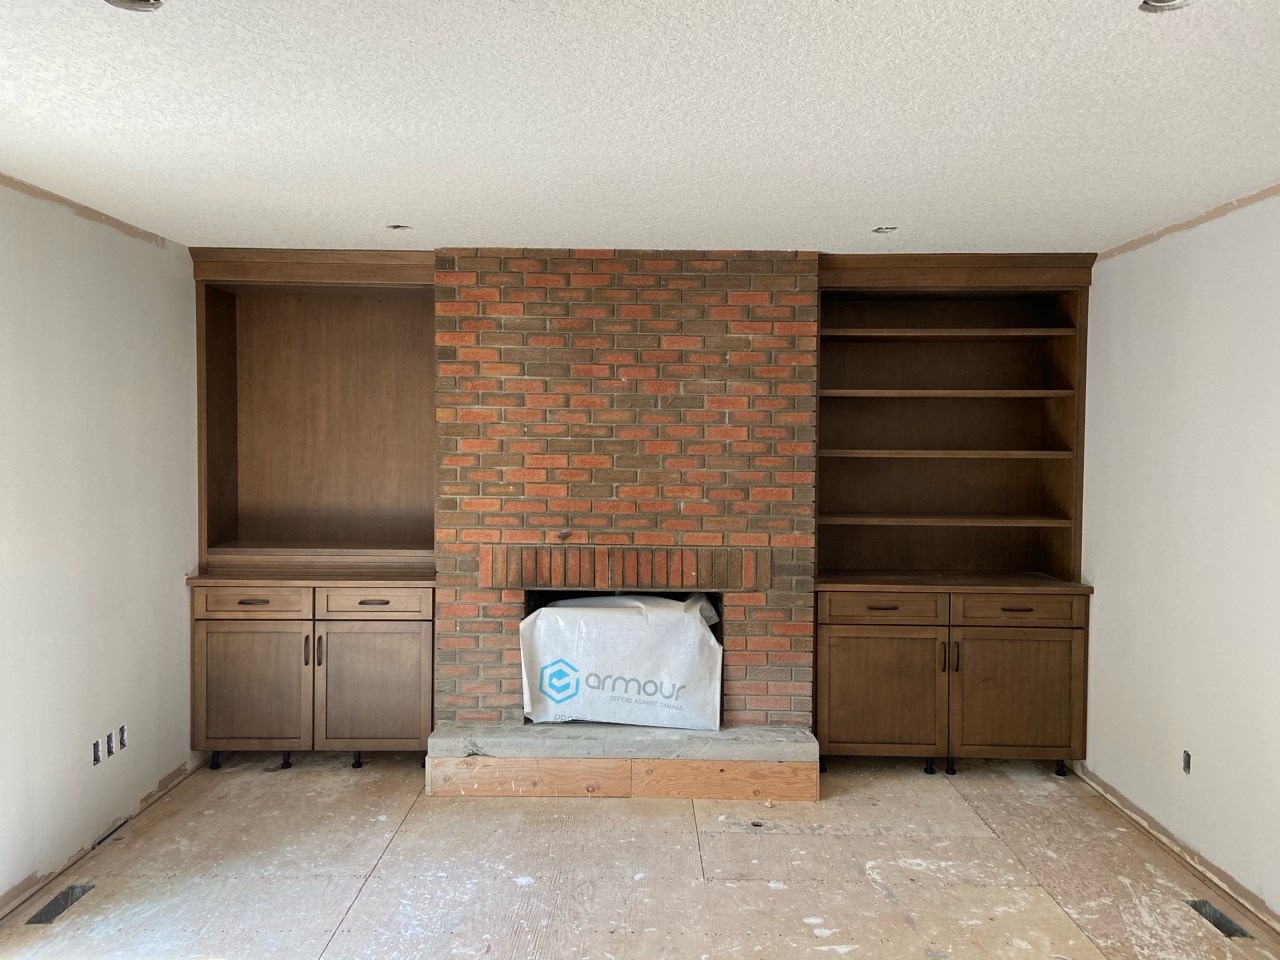 old fireplace with broken shelves on each side